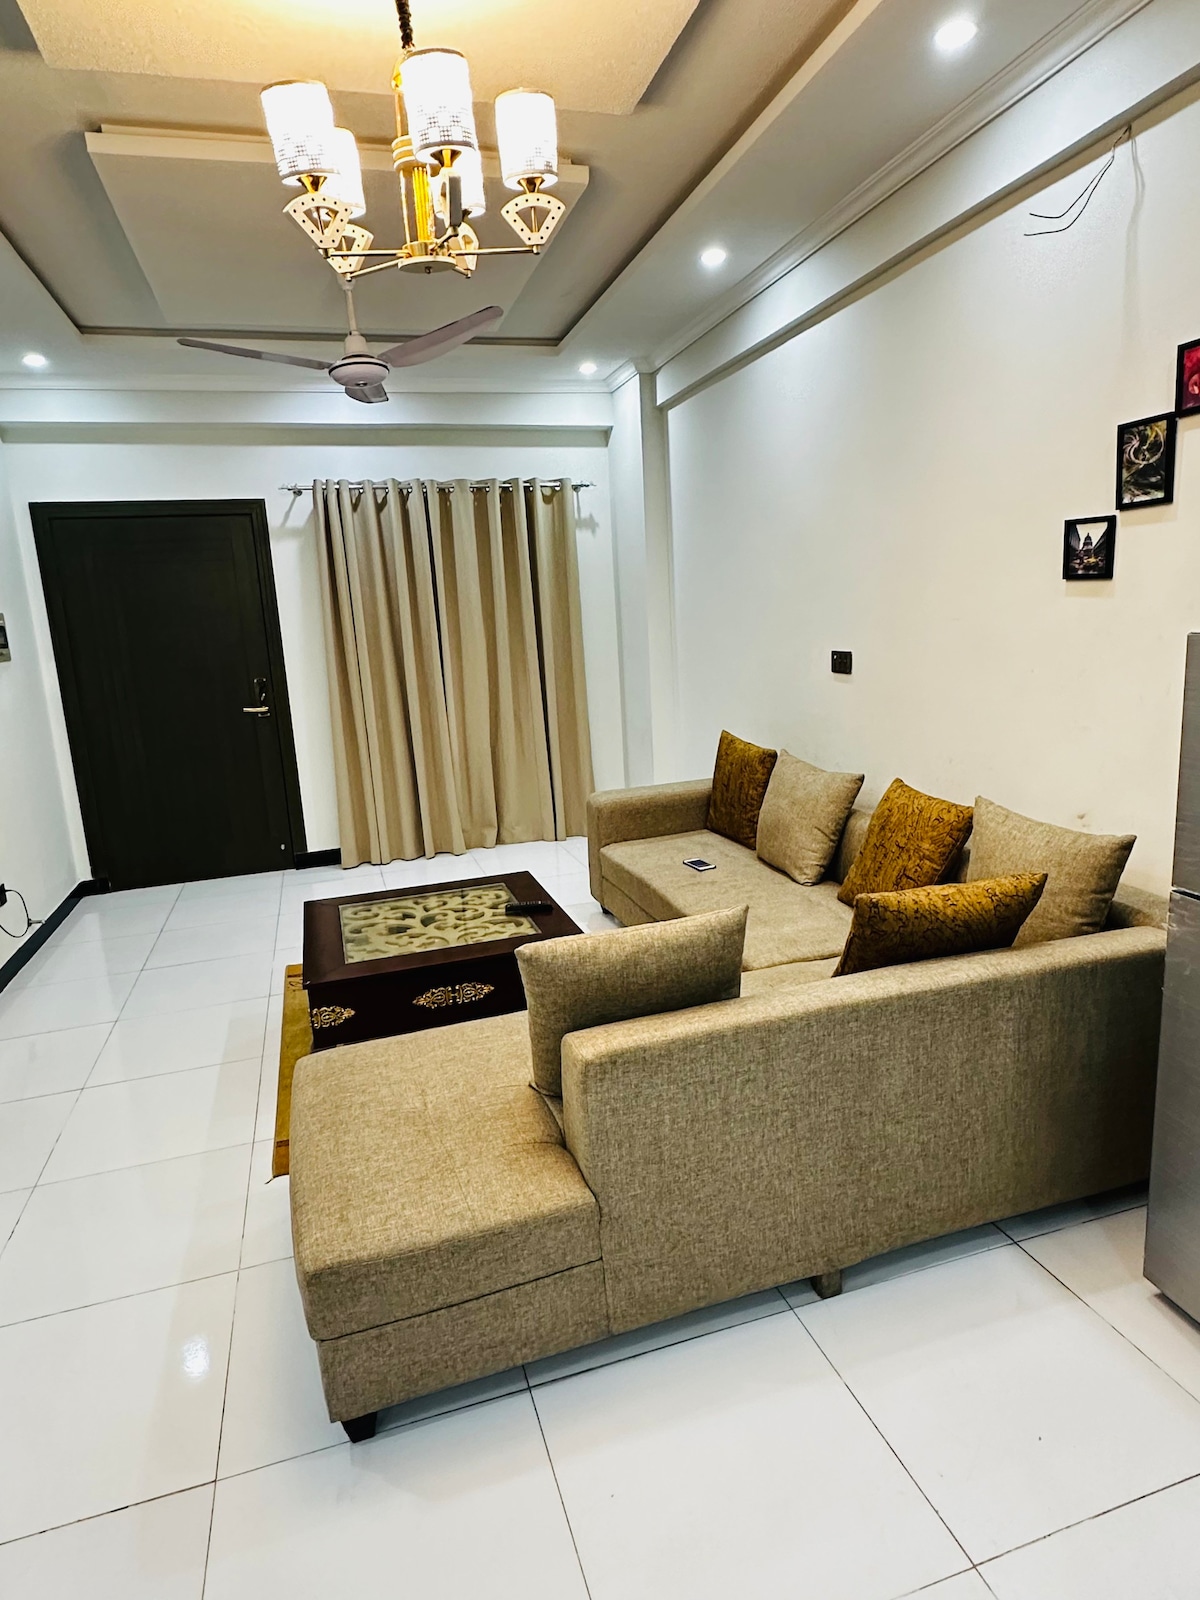 Full luxury apartment enjoy with friends and famly